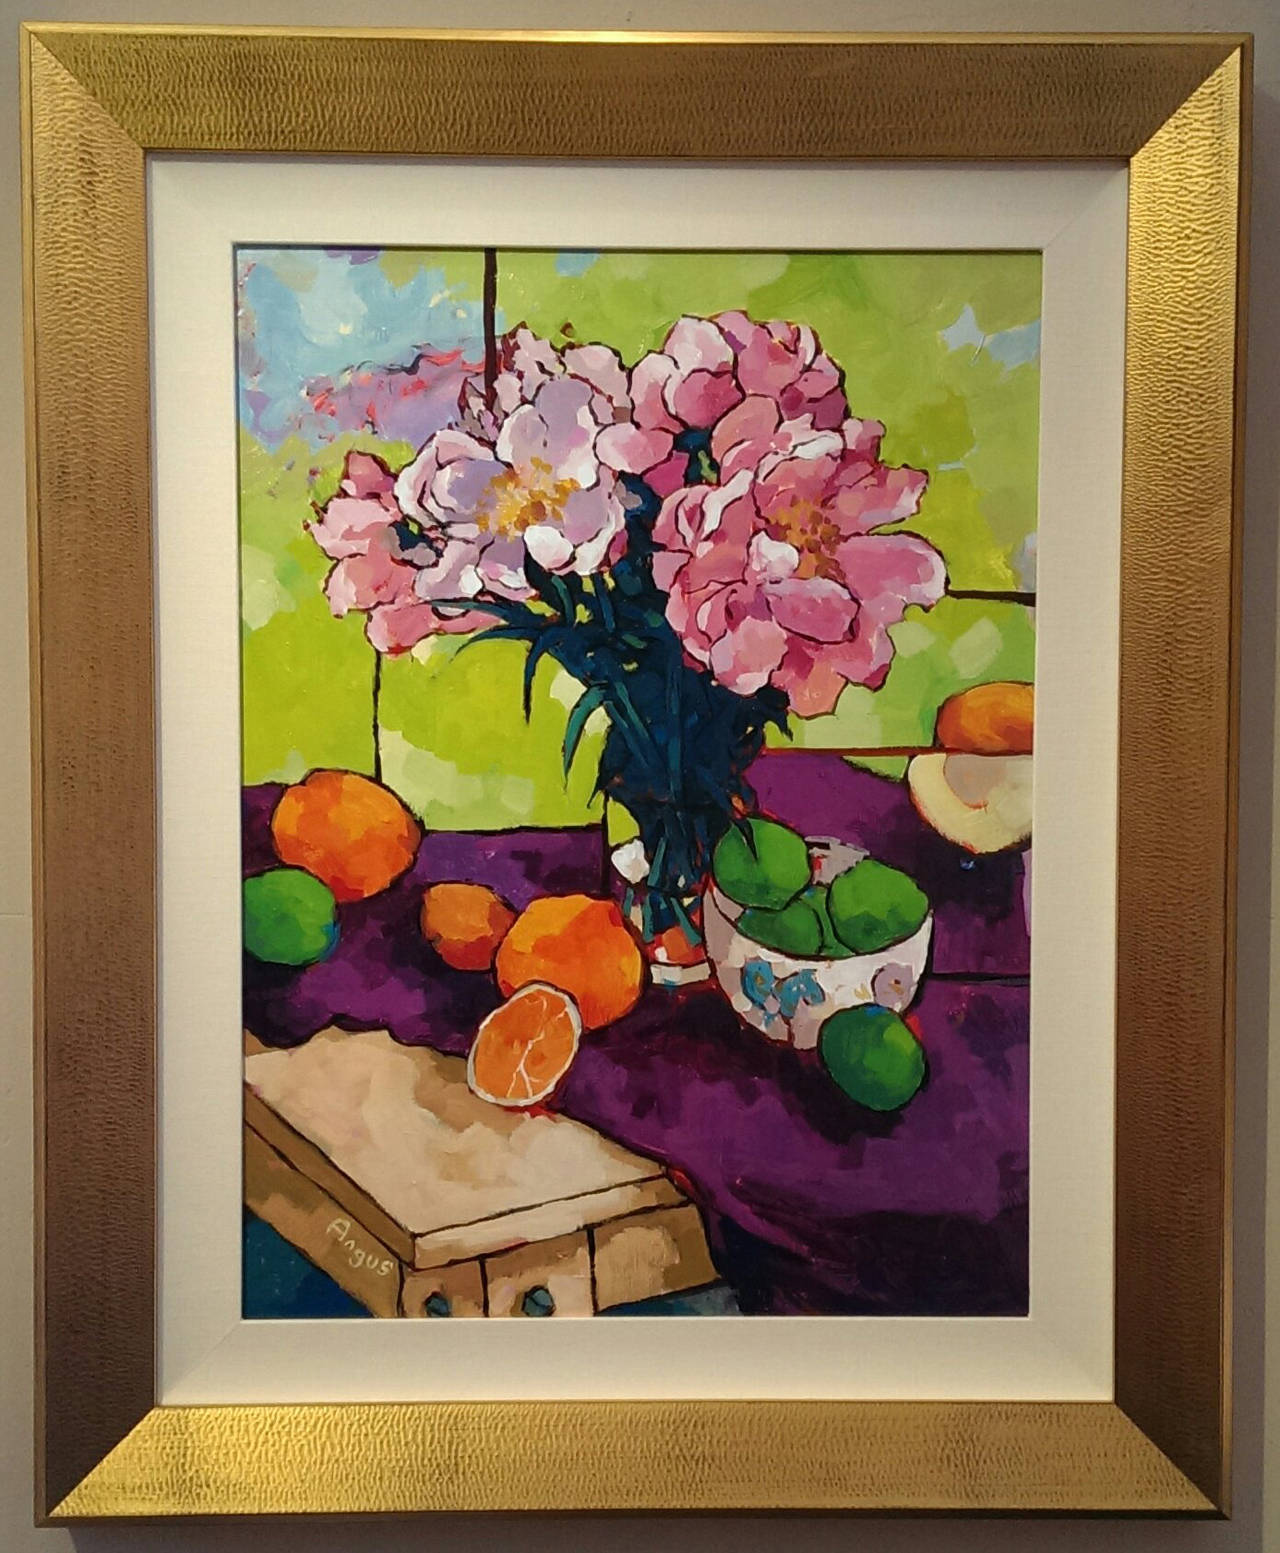 Embracing the Sun on Purple (still life, flowers, fruit) - Painting by Angus Wilson